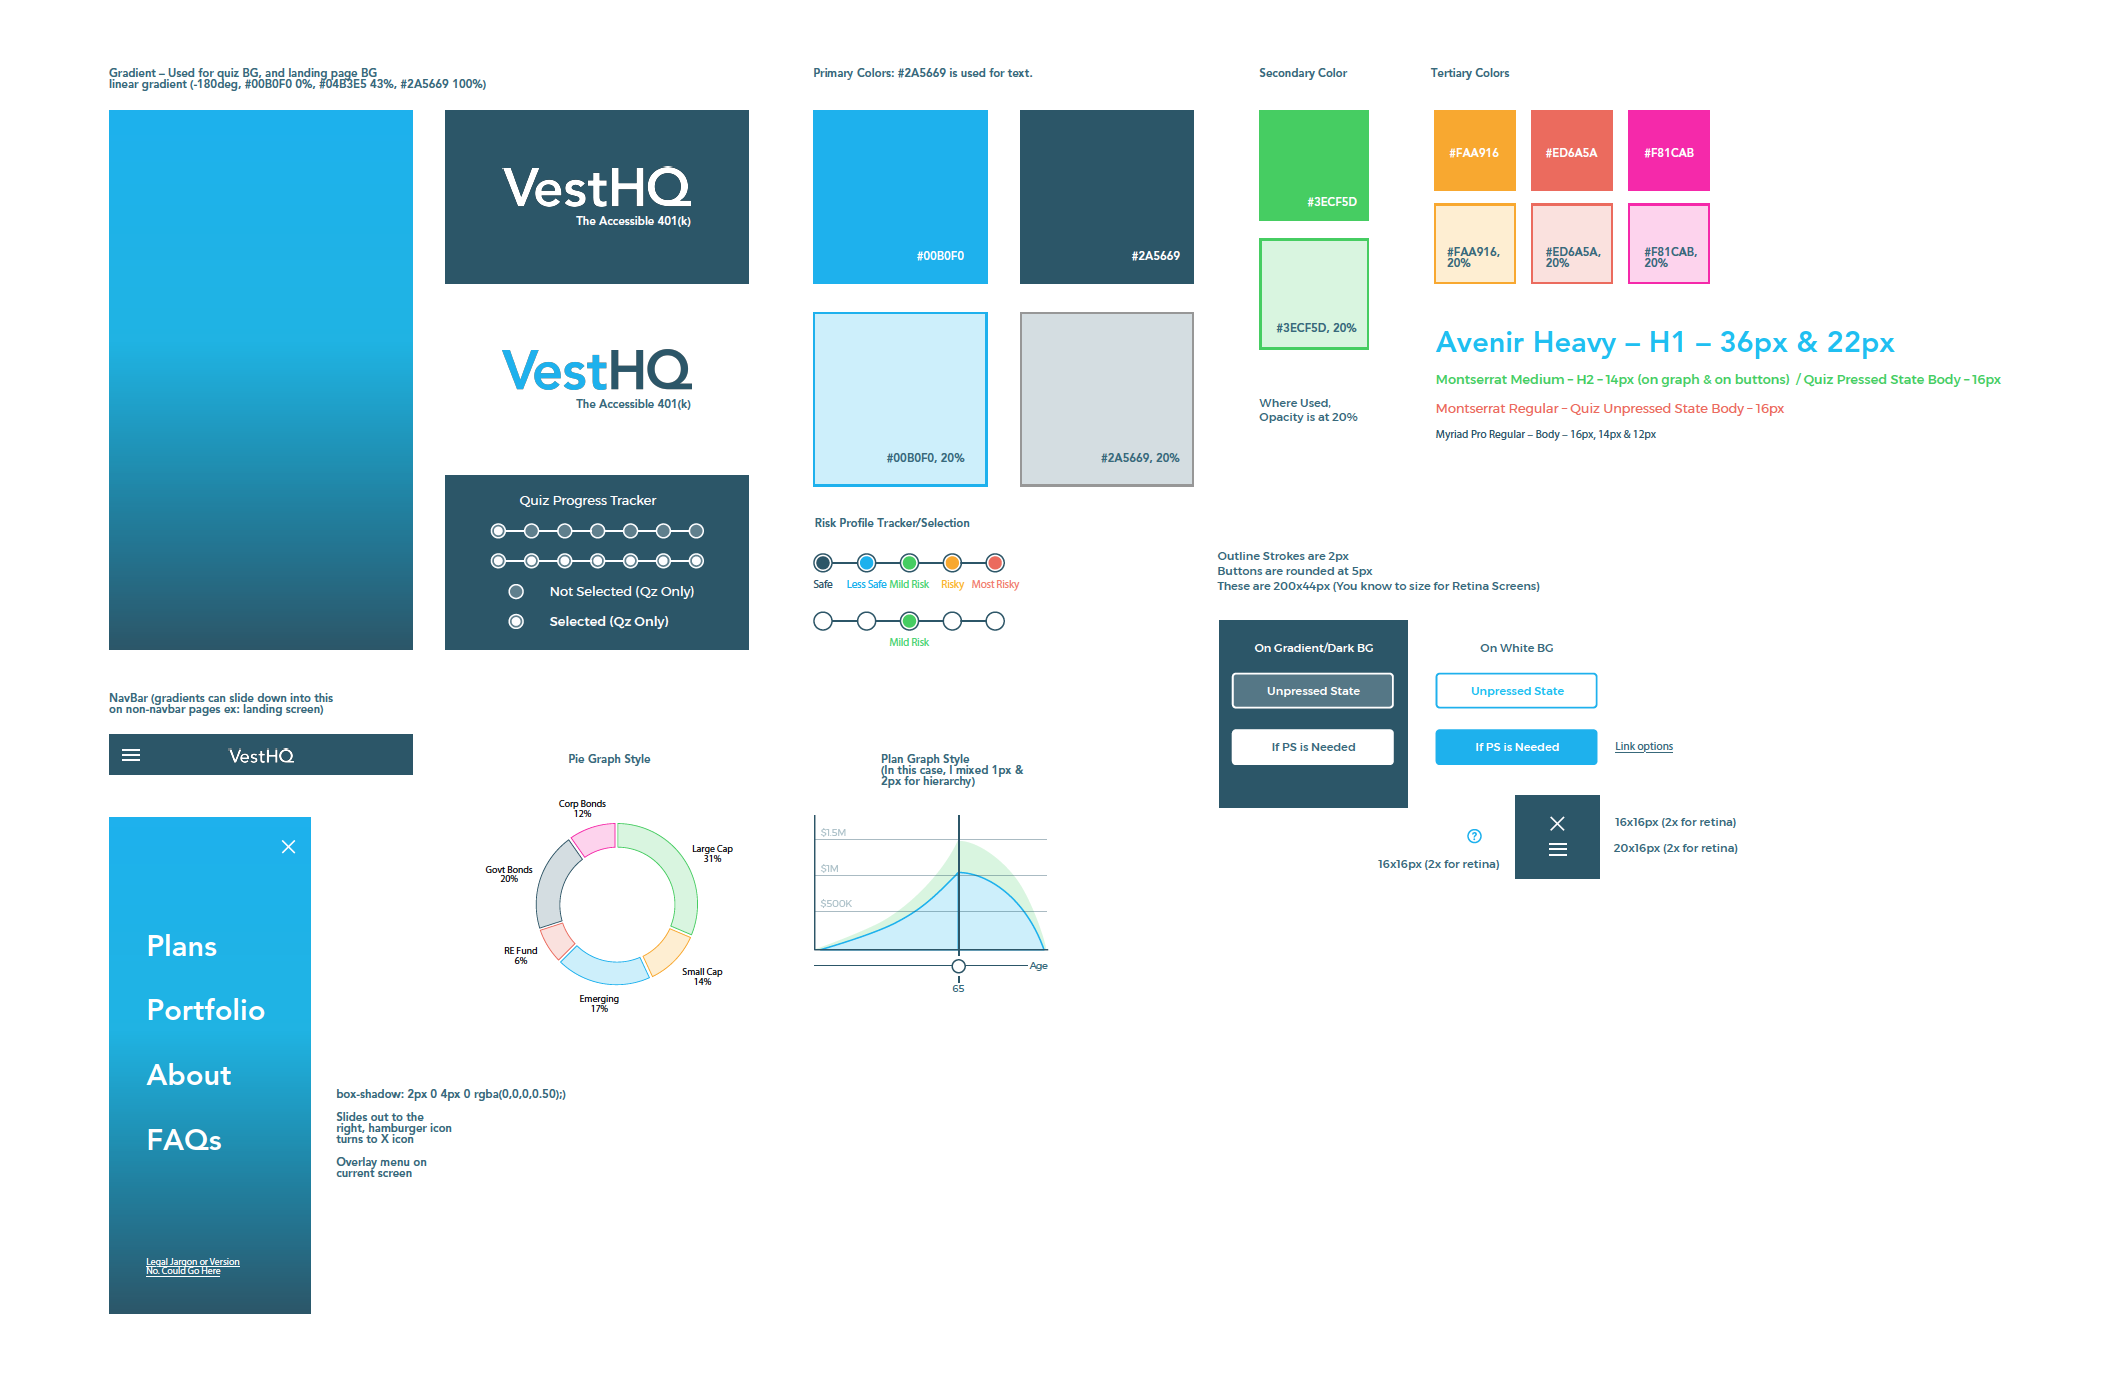 Examples of style guide components such as: colors, graphs, and mobile screens